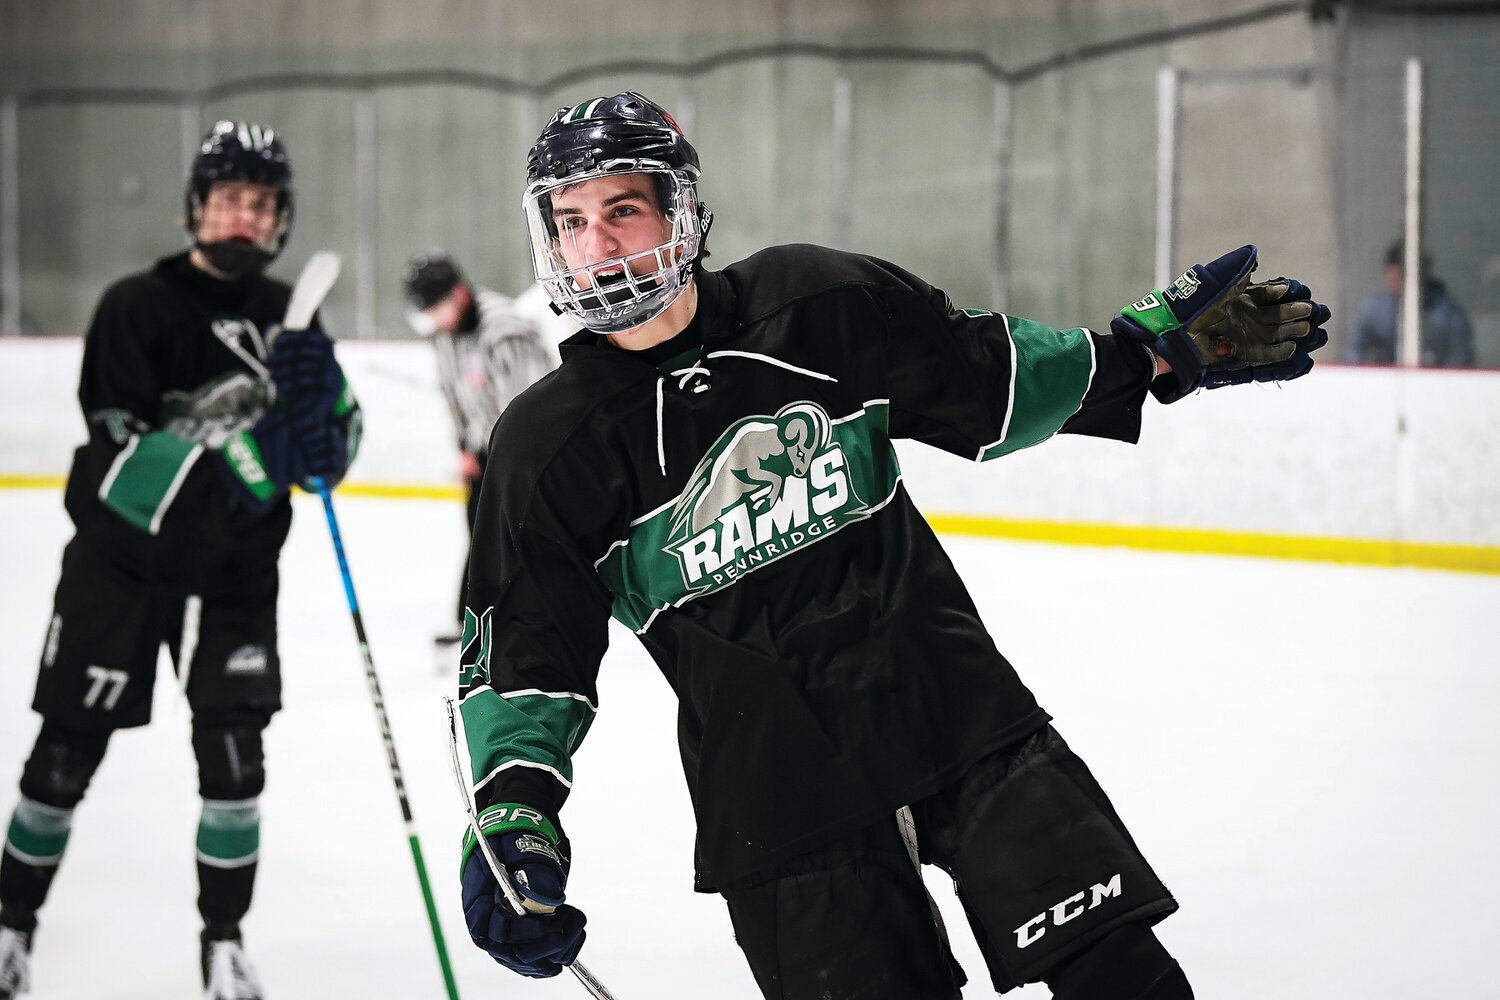 Pennridge’s Kevin Pico after his second period goal, tying the game at 6 apiece.